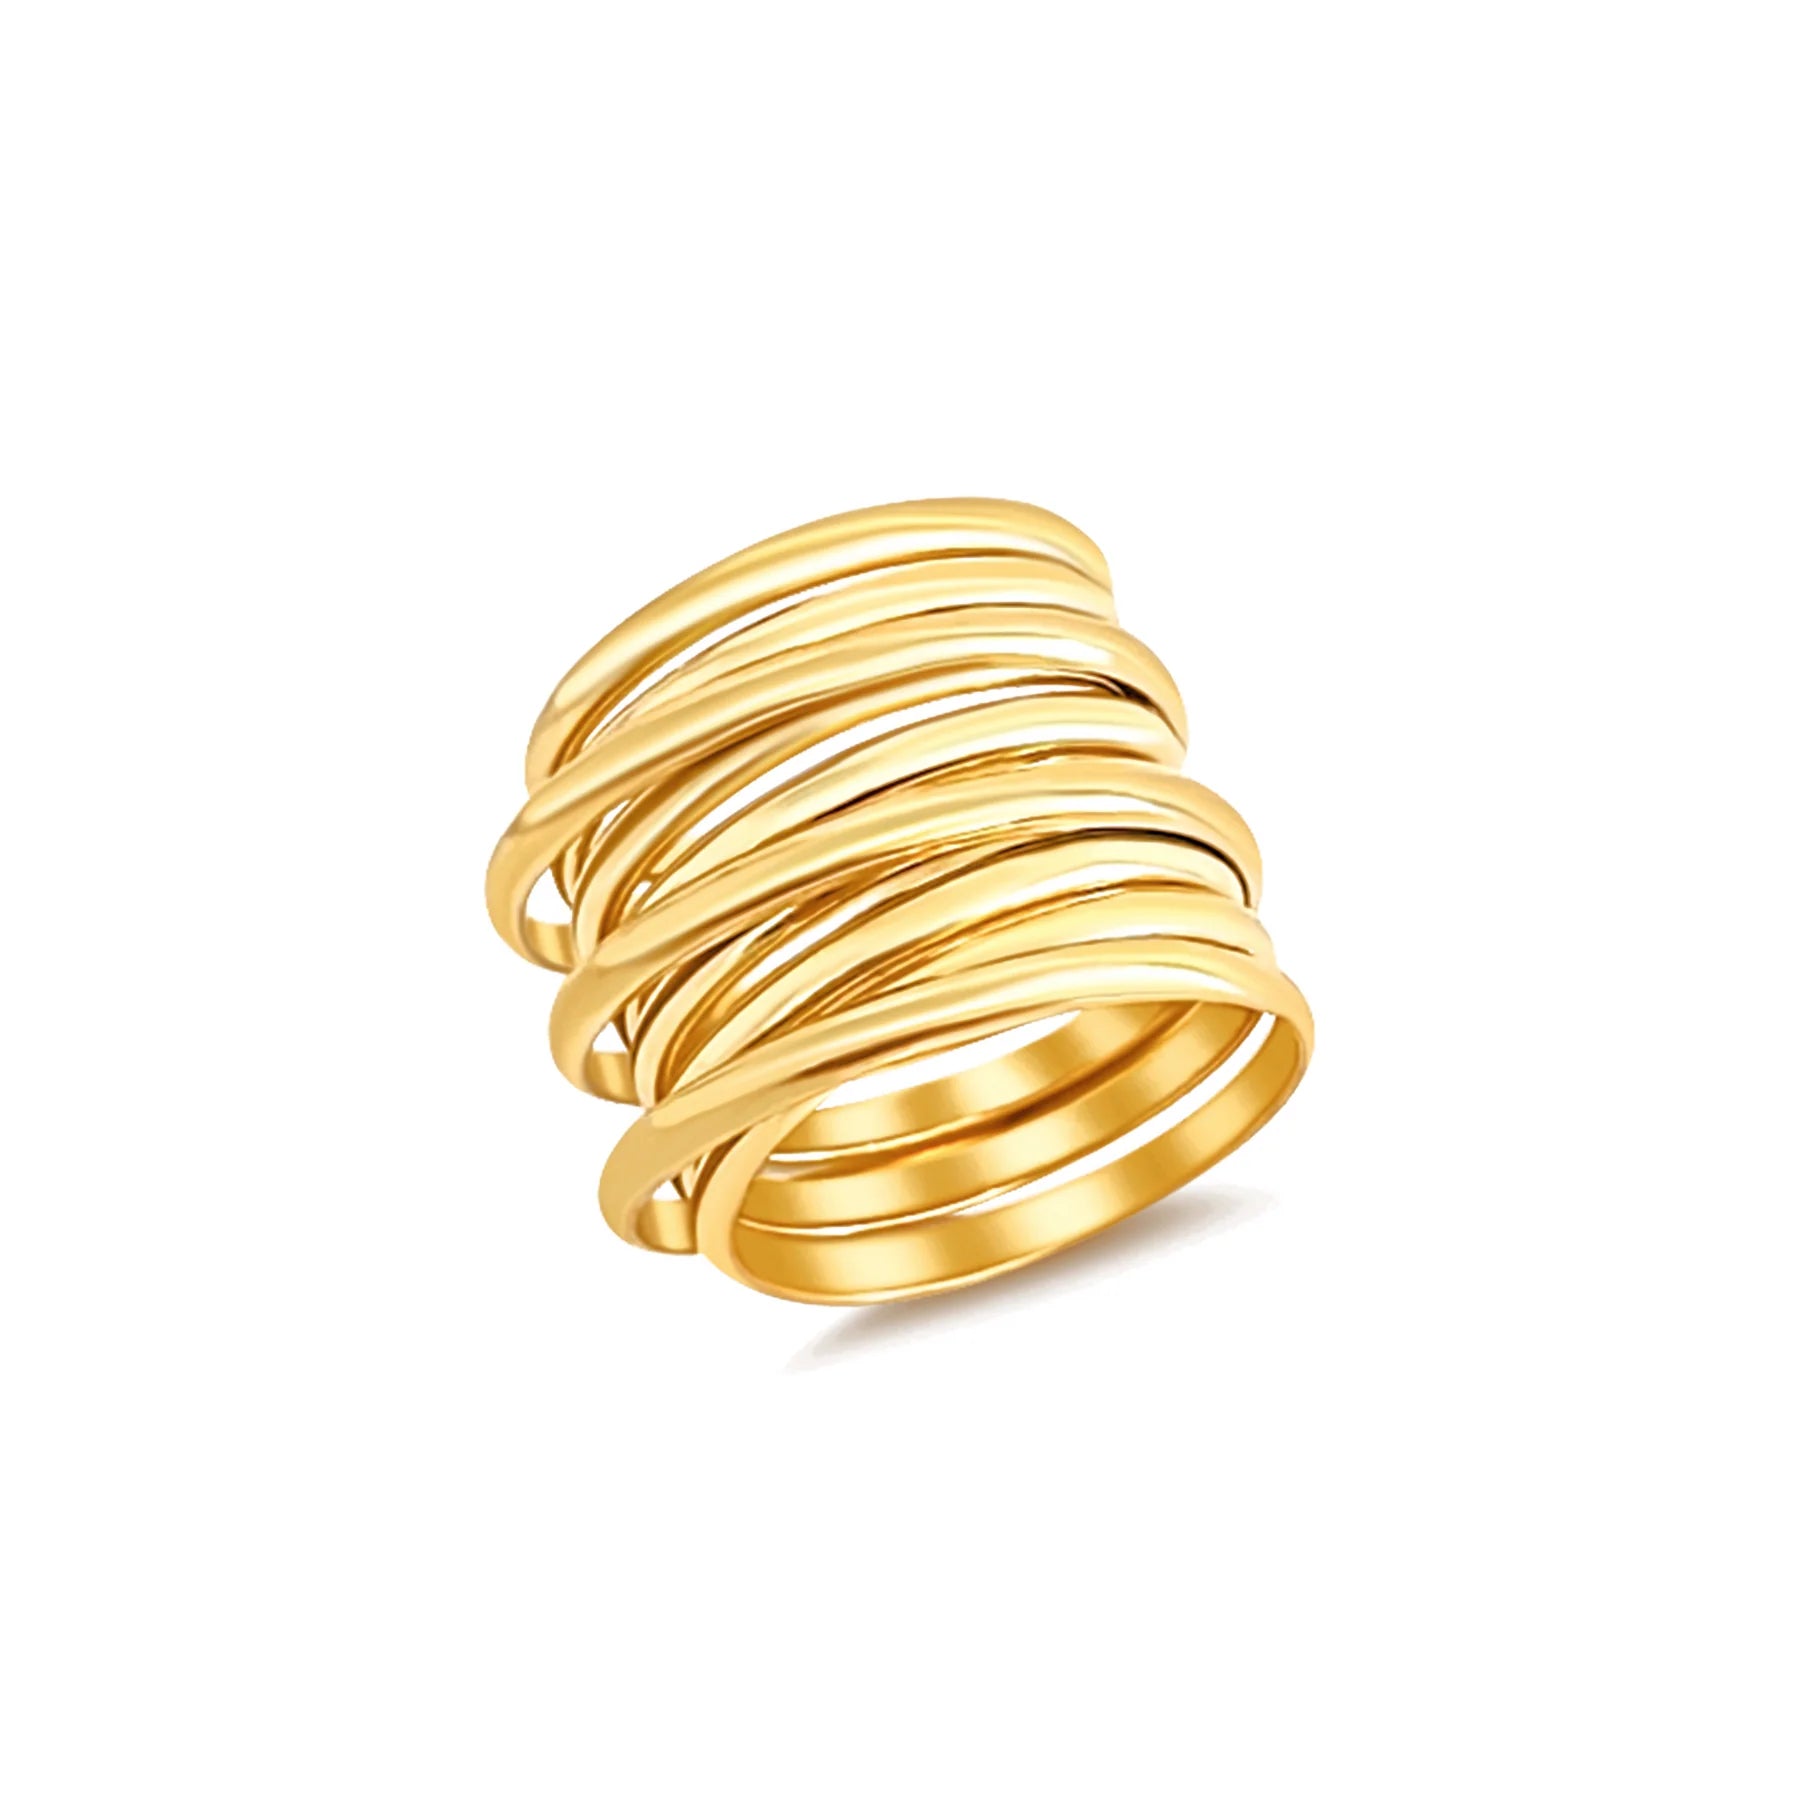 Ellie Vail Margot Coil Band Ring